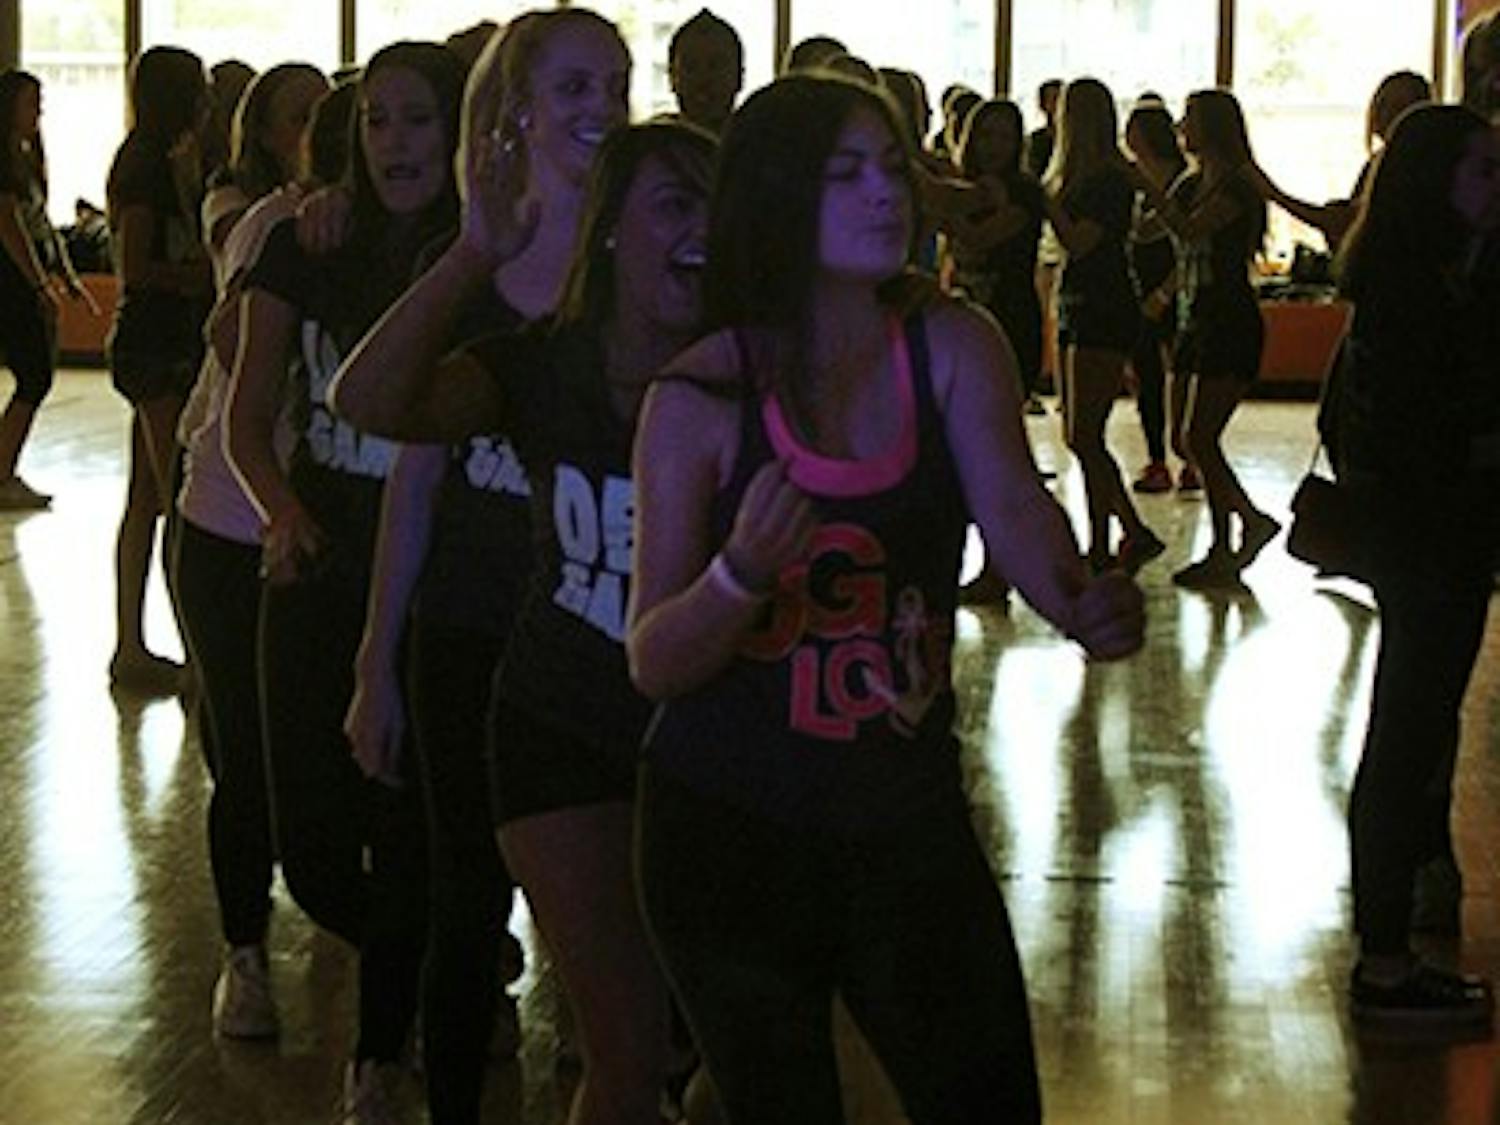 Students create a conga line  while dancing at the Dance Marathon on Feb. 22. (Photo by Alexis Macklin)